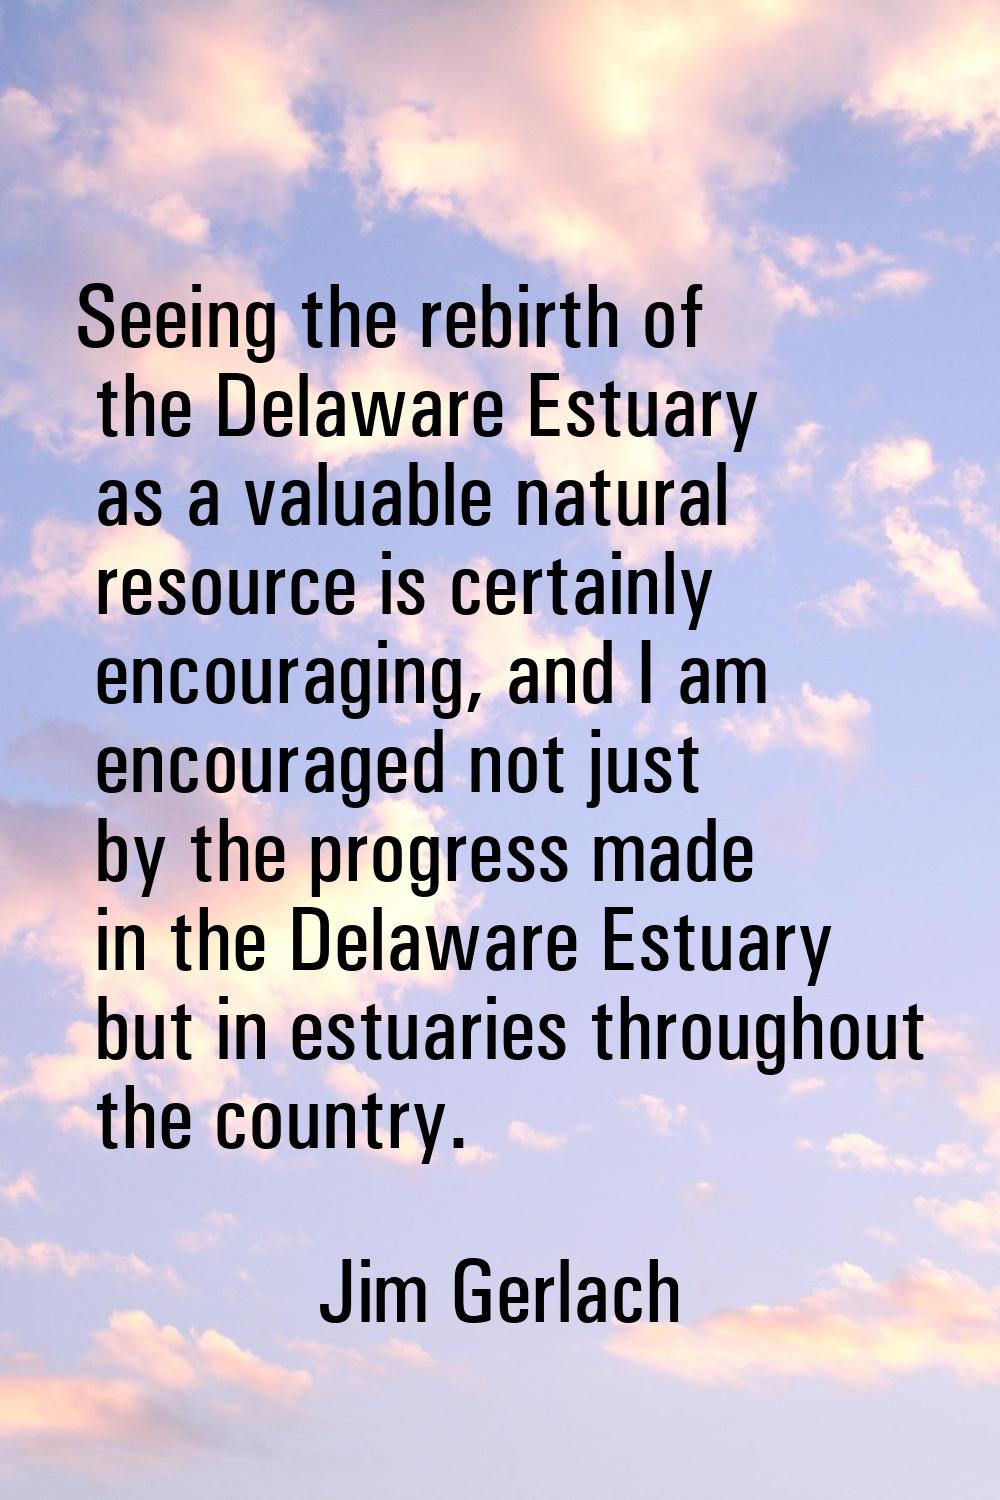 Seeing the rebirth of the Delaware Estuary as a valuable natural resource is certainly encouraging,